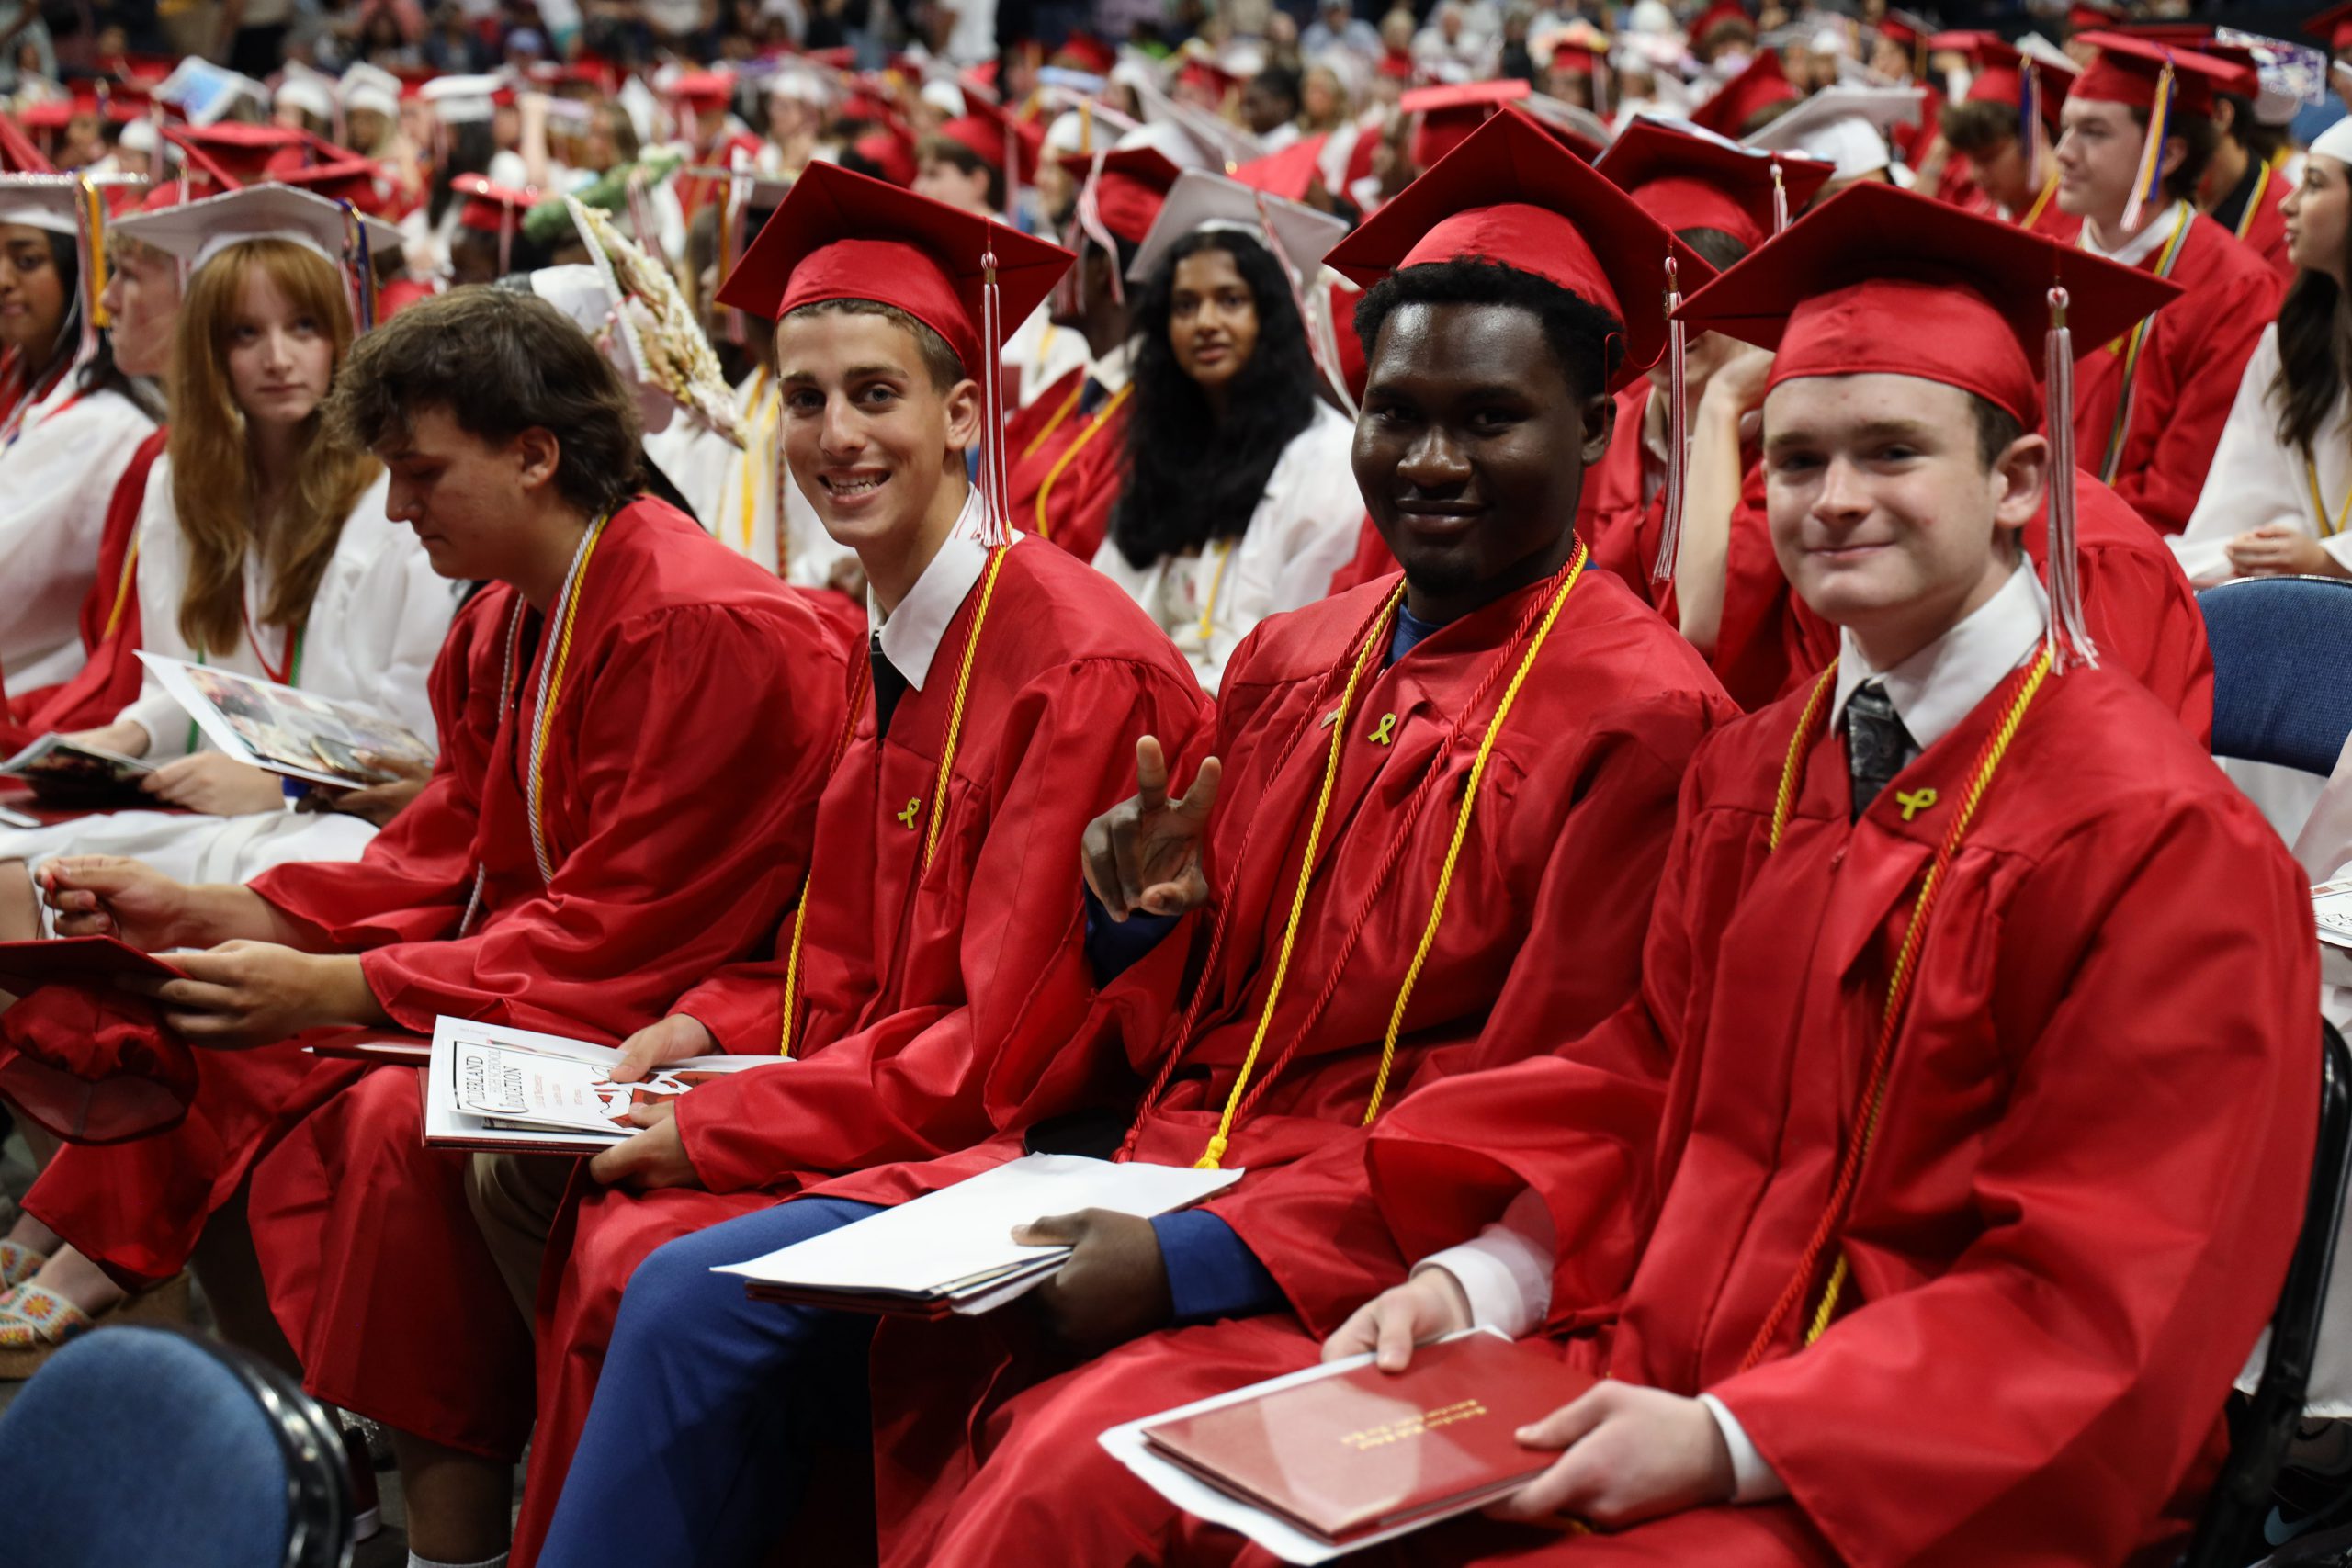 Students wearing caps and gowns, some are red and some are white, are seated in rows. A few are looking at the camera and smiling. One is giving a peace sign